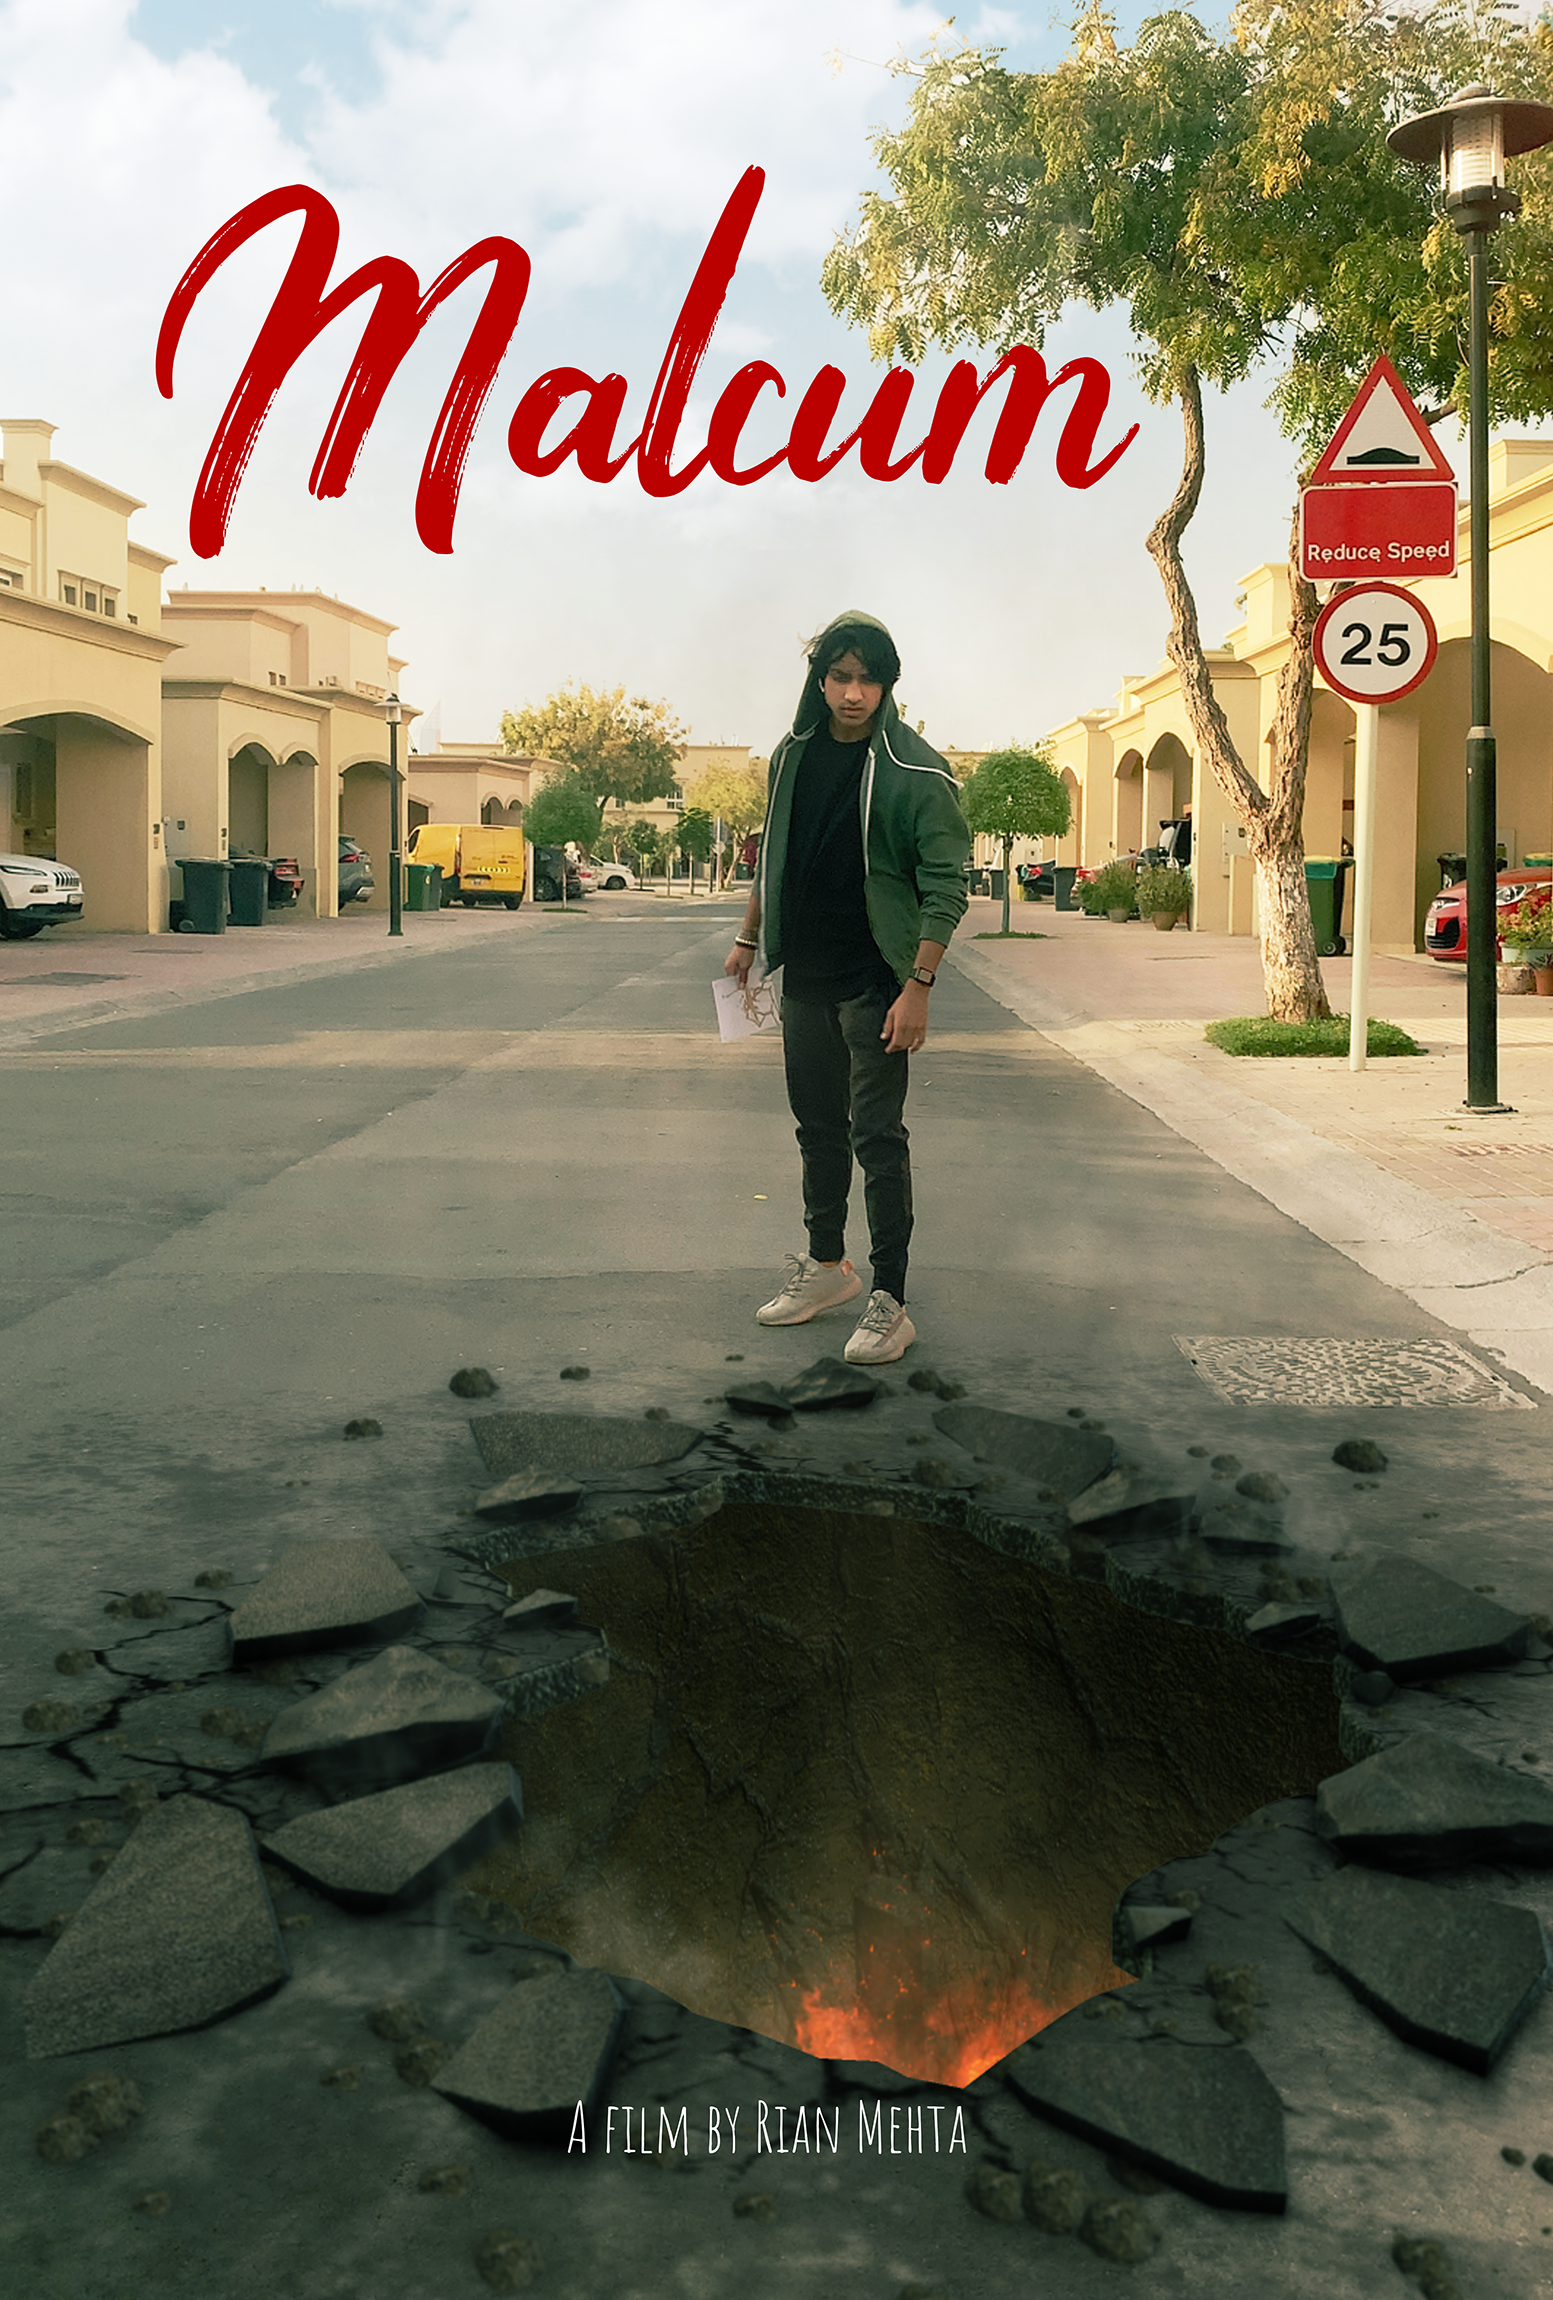 Malcum Movie Poster a Film by Rian Mehta